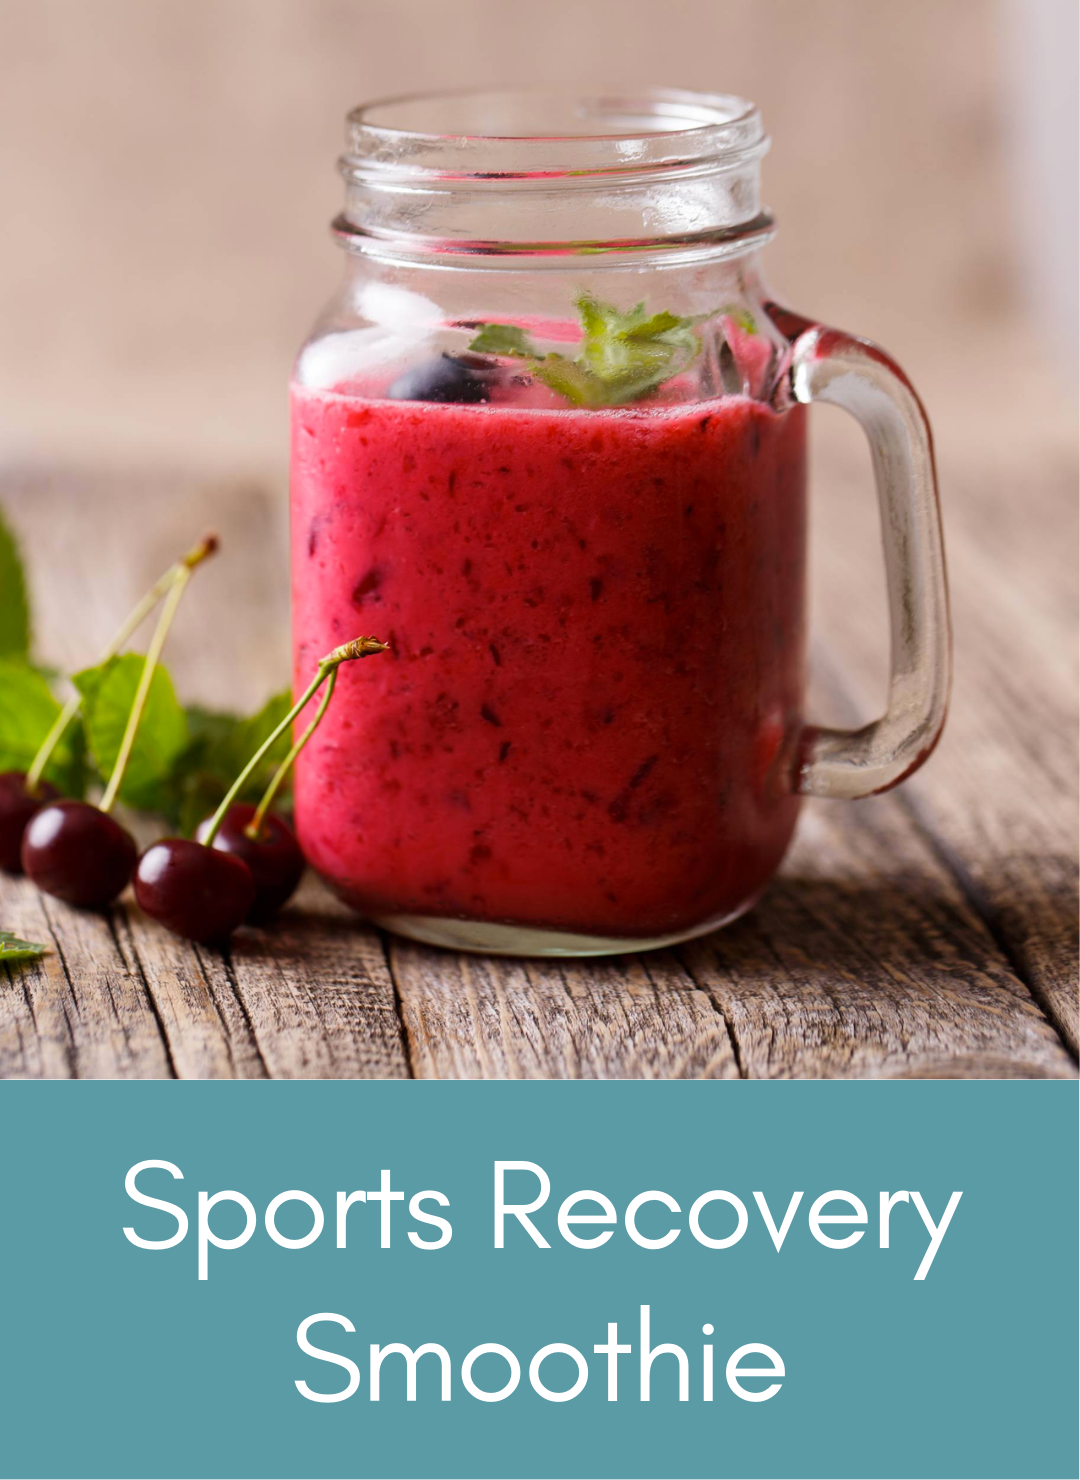 Whole food plant based soothing recovery smoothie Picture with link to recipe